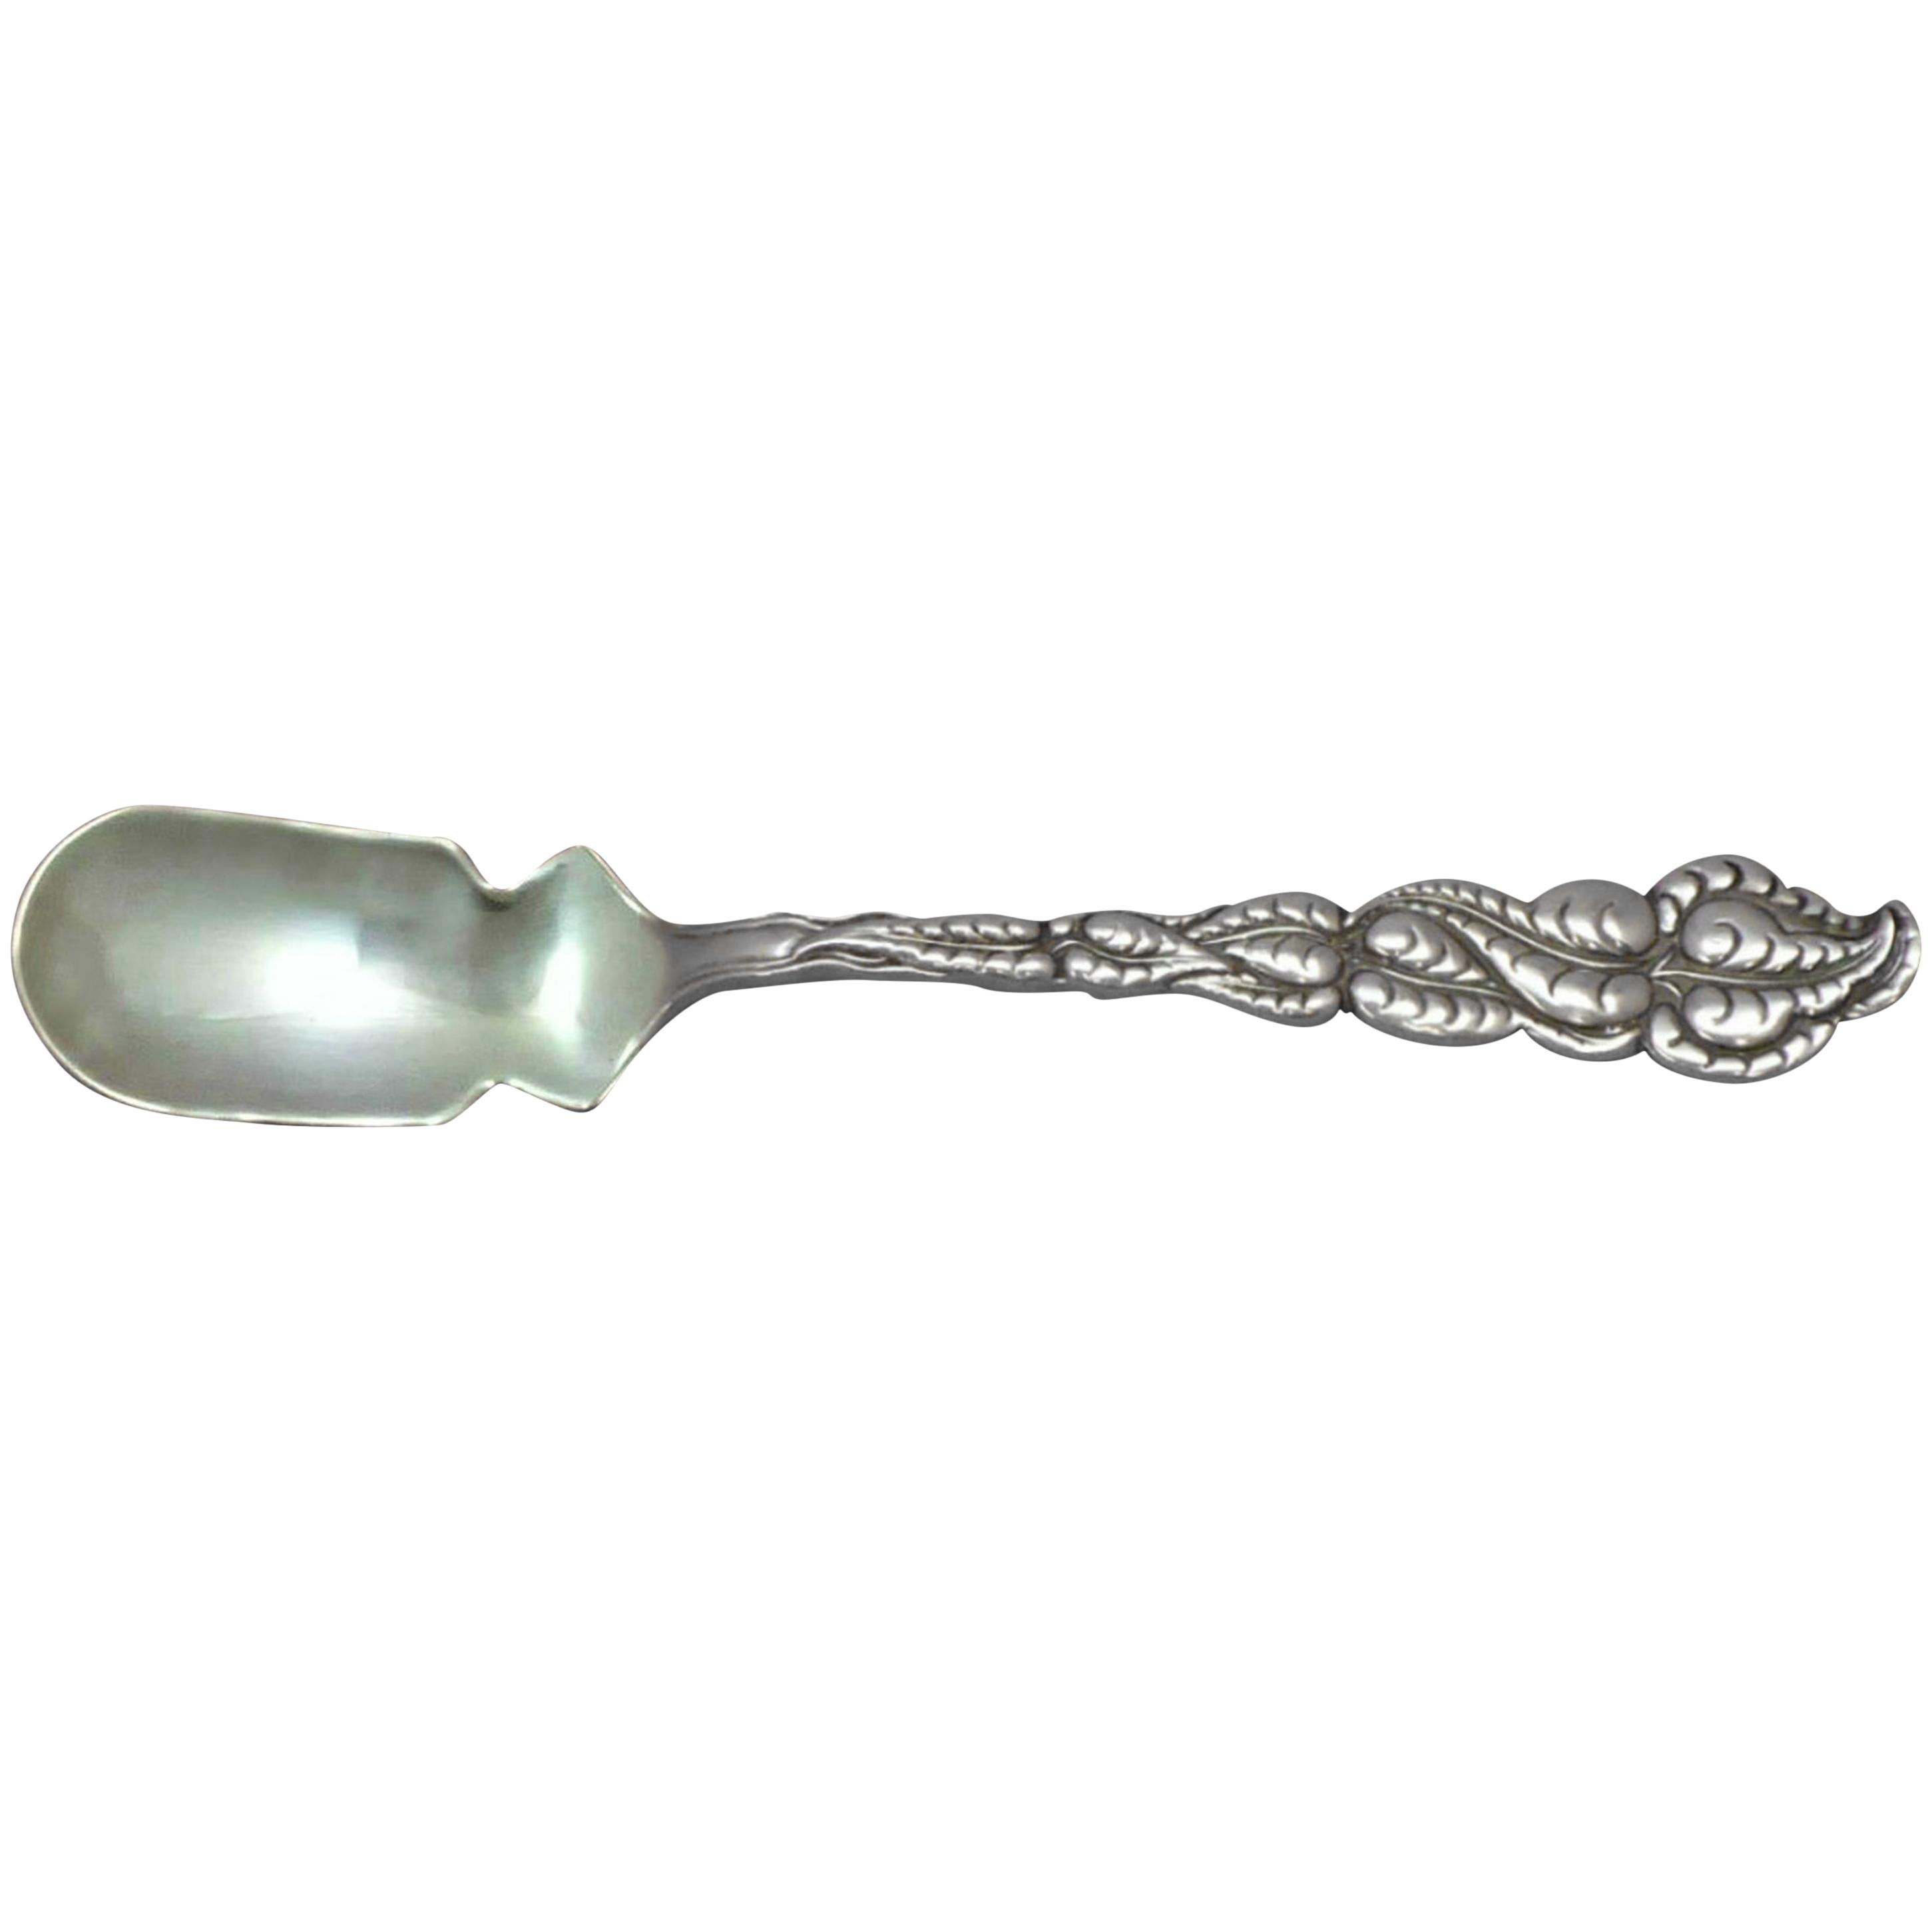 Ailanthus by Tiffany & Co Sterling Silver Horseradish Scoop Custom Made